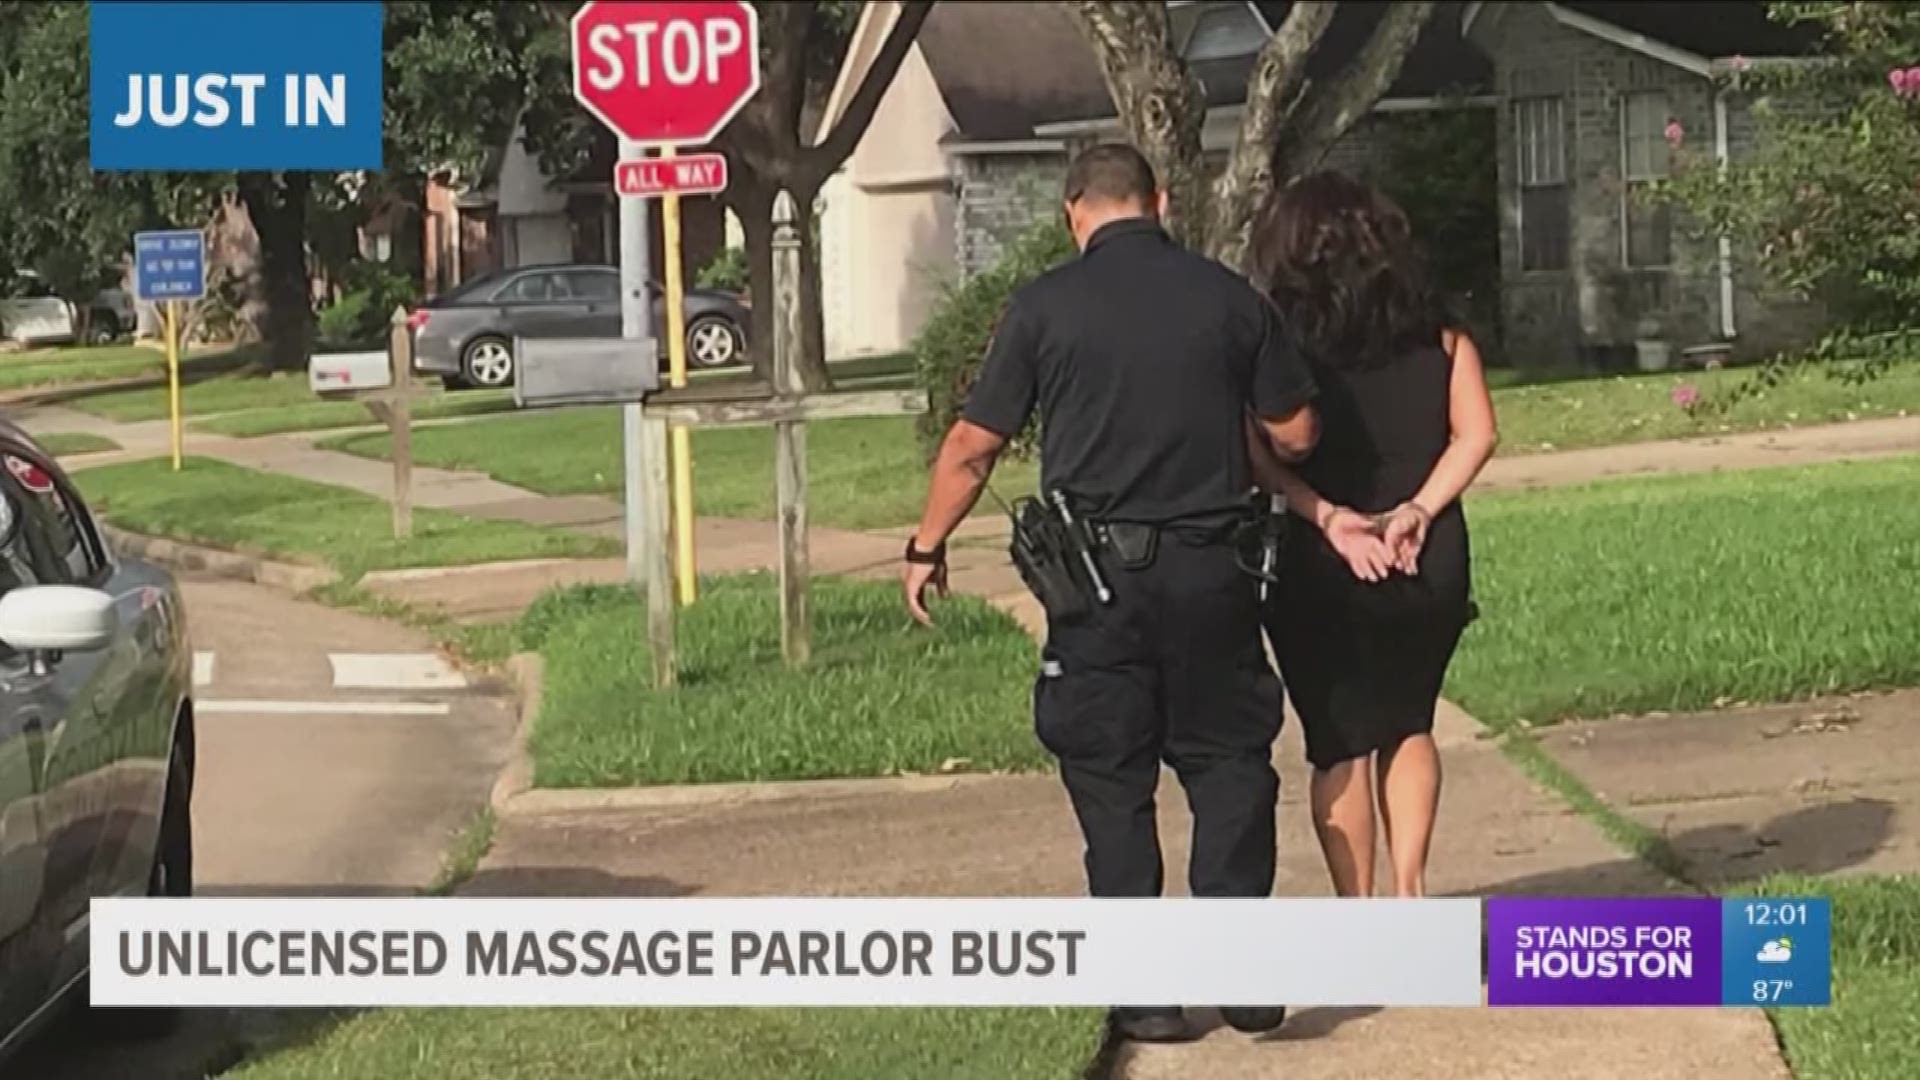 A woman was arrested in Atascocita on Wednesday for running an illegal massage parlor that is suspected to also be a brothel, deputies said.